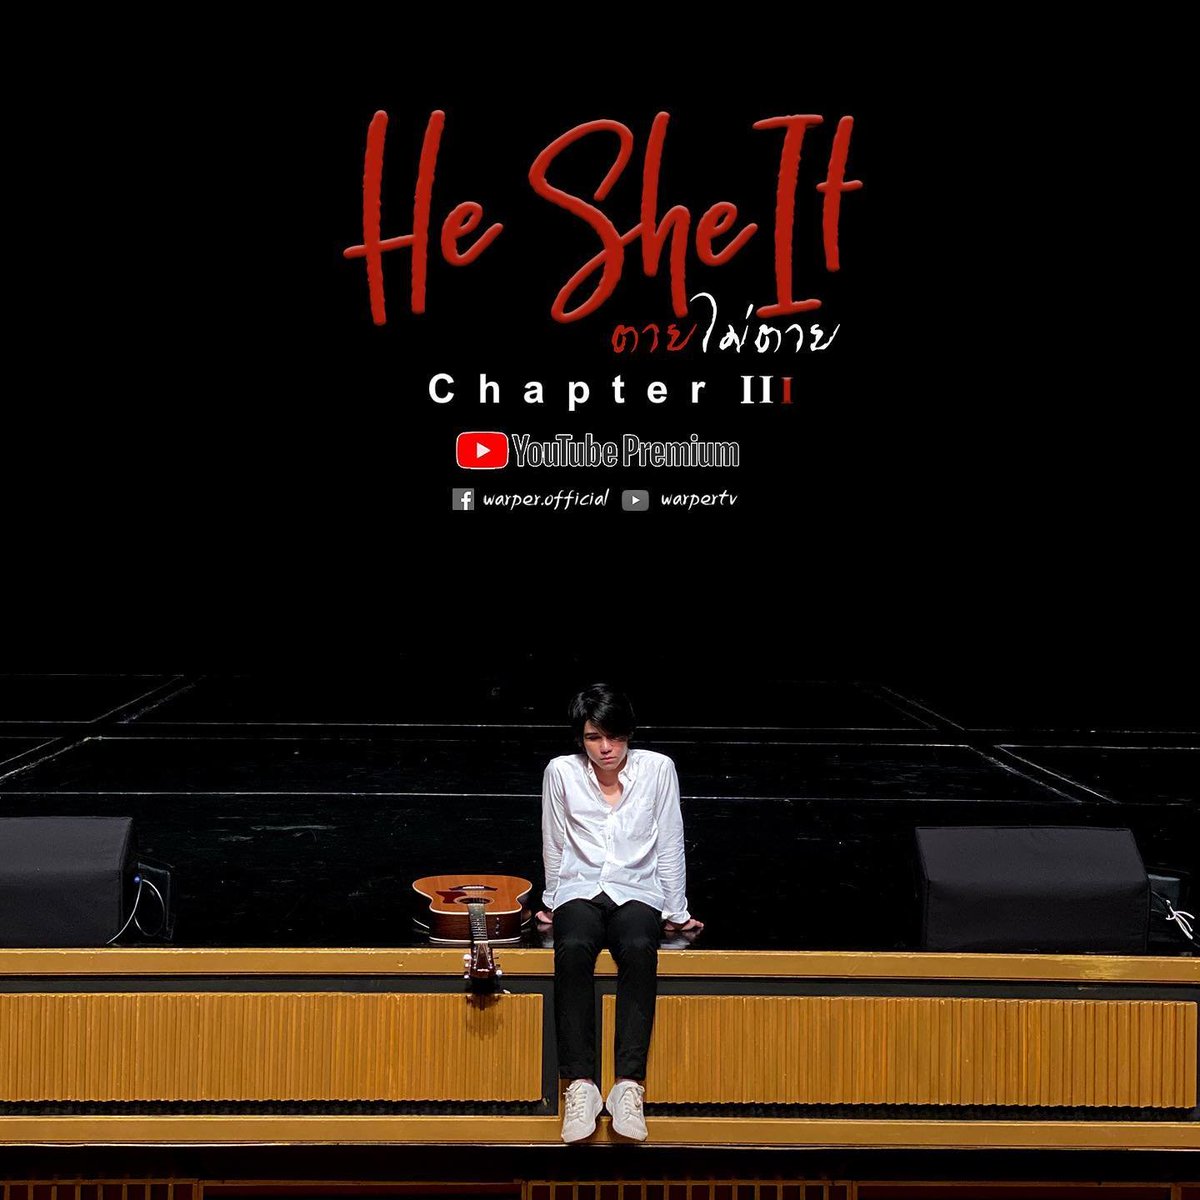 Bl Update Are You Ready For The Chapter 3 Of Hesheit ตายไม ตาย Coming Soon Watch The Ep 1 And 2 Here T Co 1bvg3hzb7i Ytb Warpertv T Co Wdnbm8pkpp